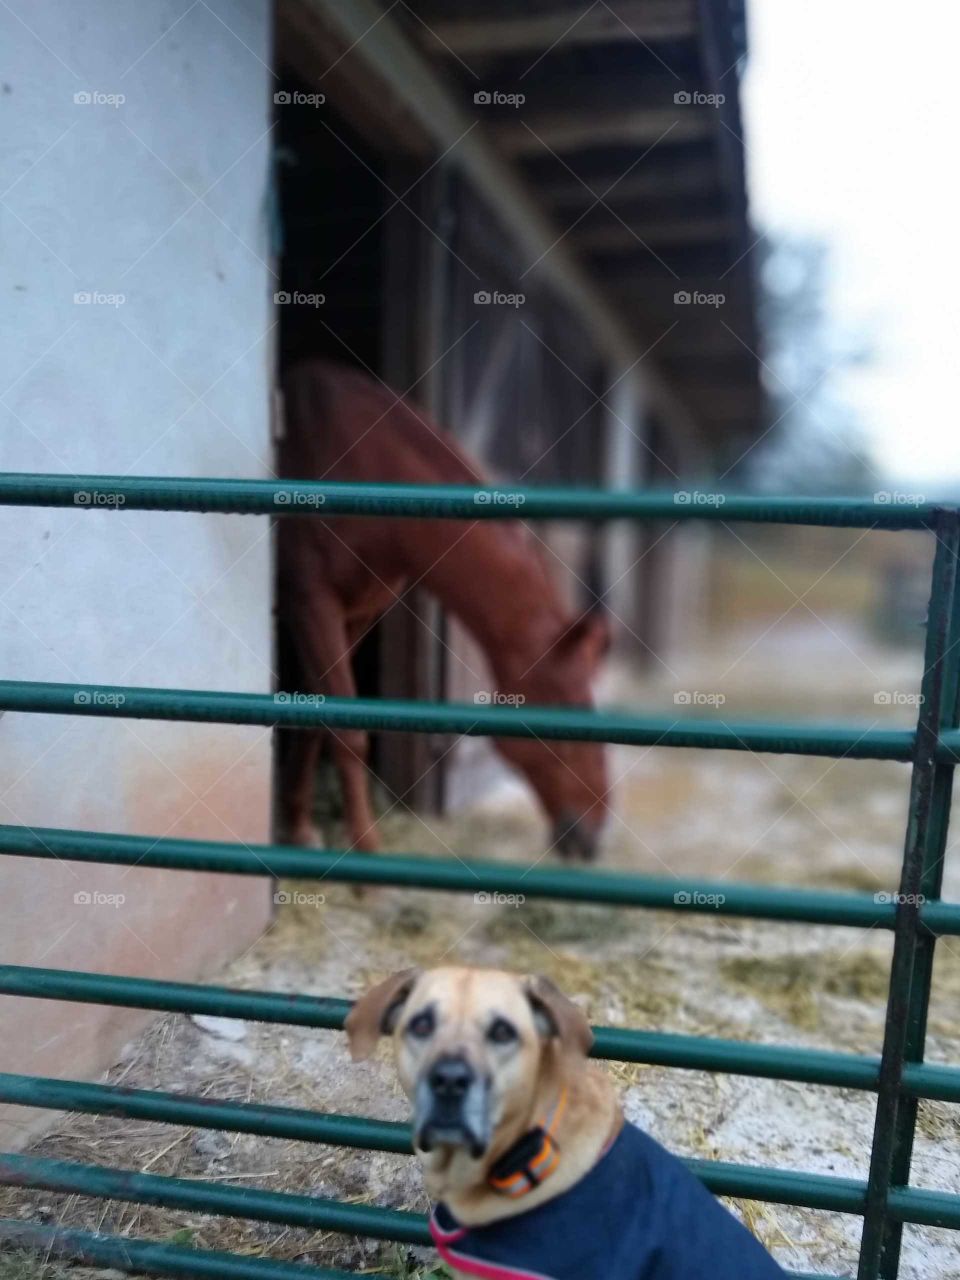 my dog visits with his equine buddies